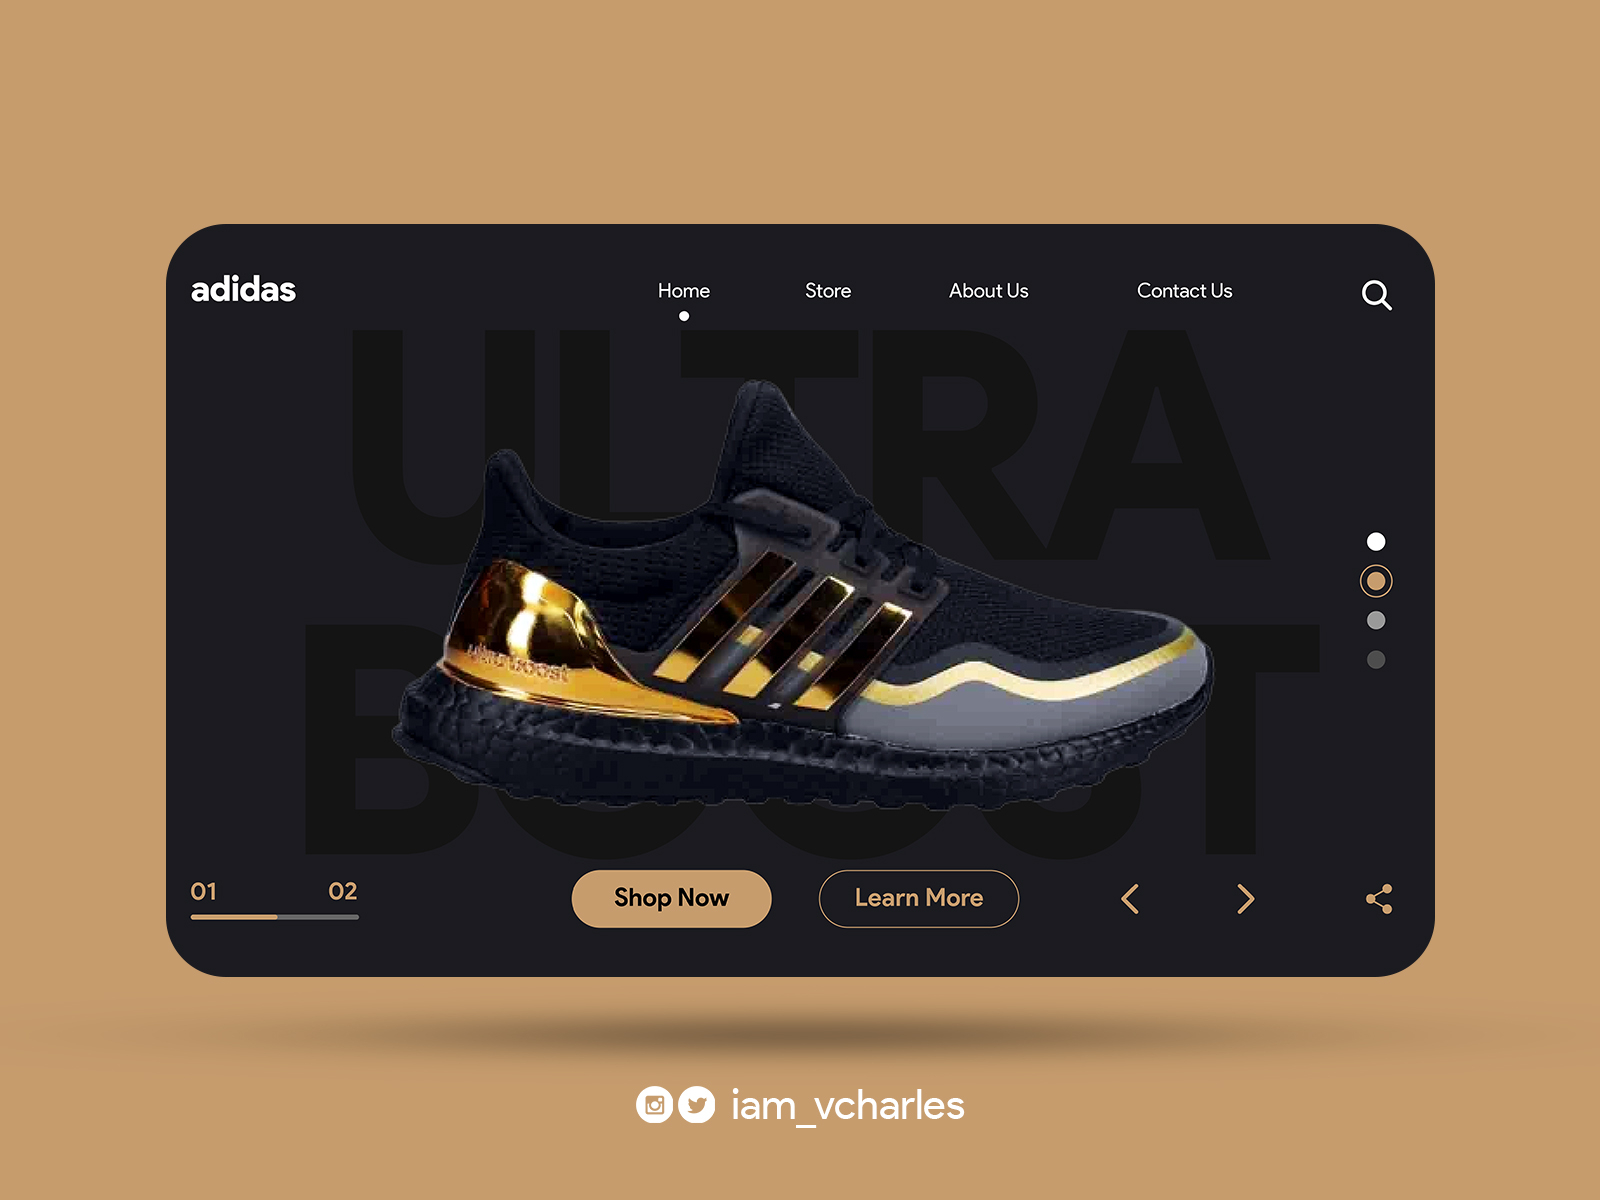 Adidas (Ultra Boost) Sneakers Landing Page UI by on